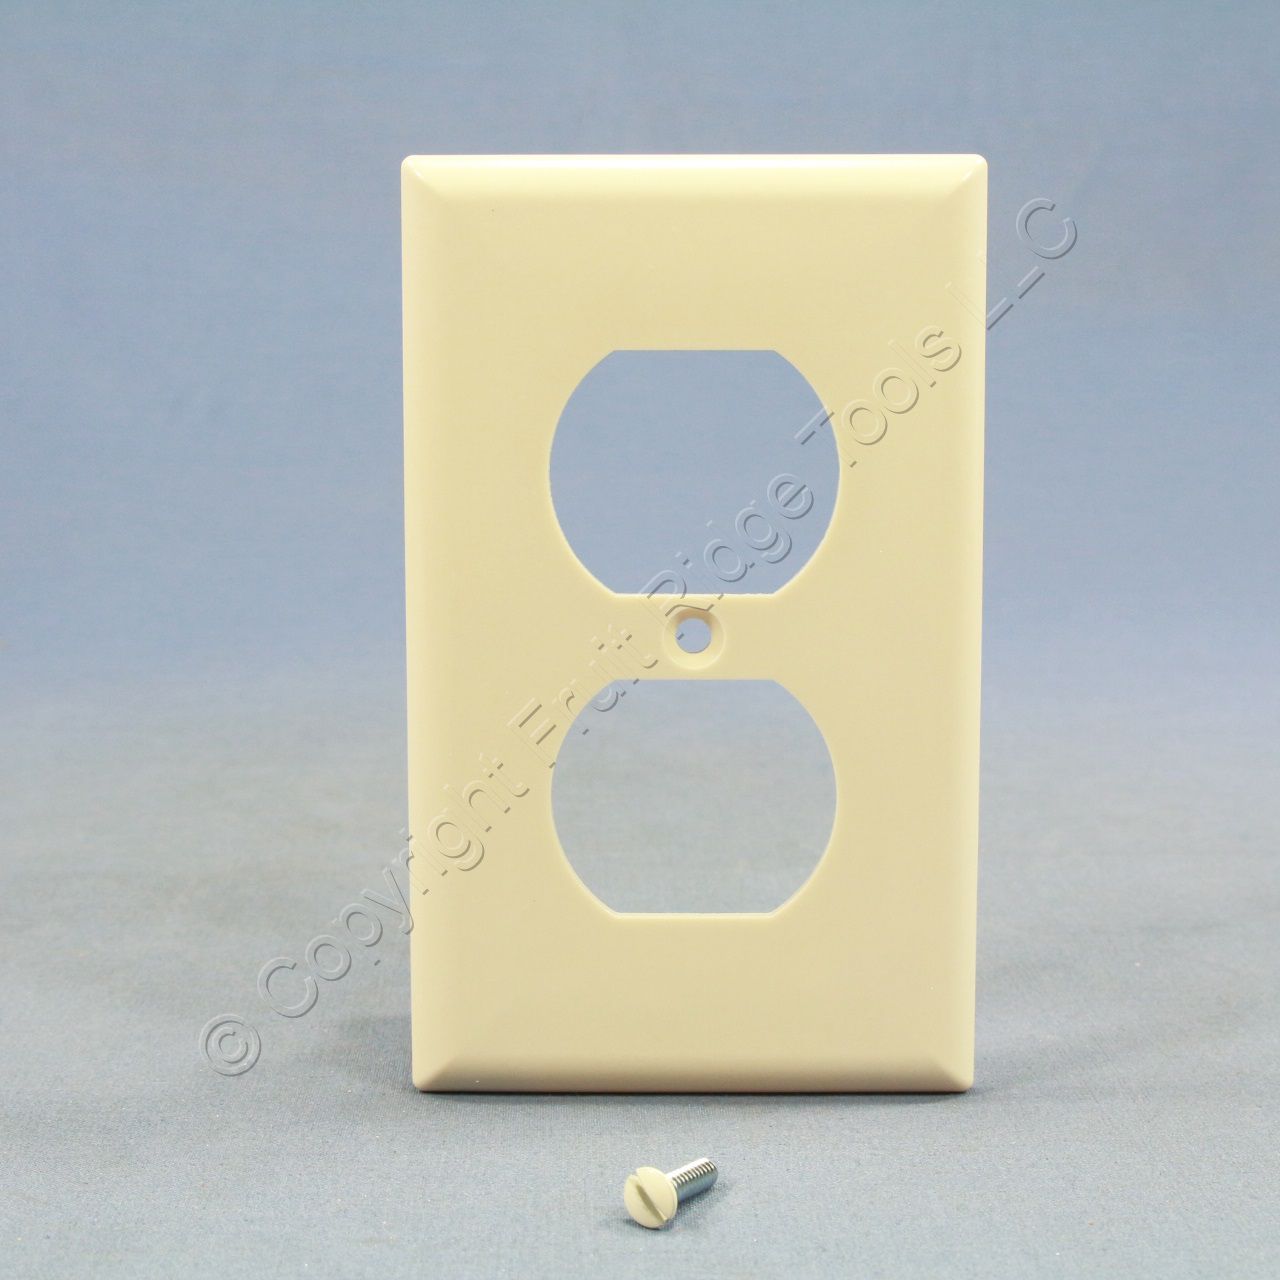 90 New Leviton Almond LARGE Unbreakable Receptacle Wallplate Outlet Covers PJ8-A 